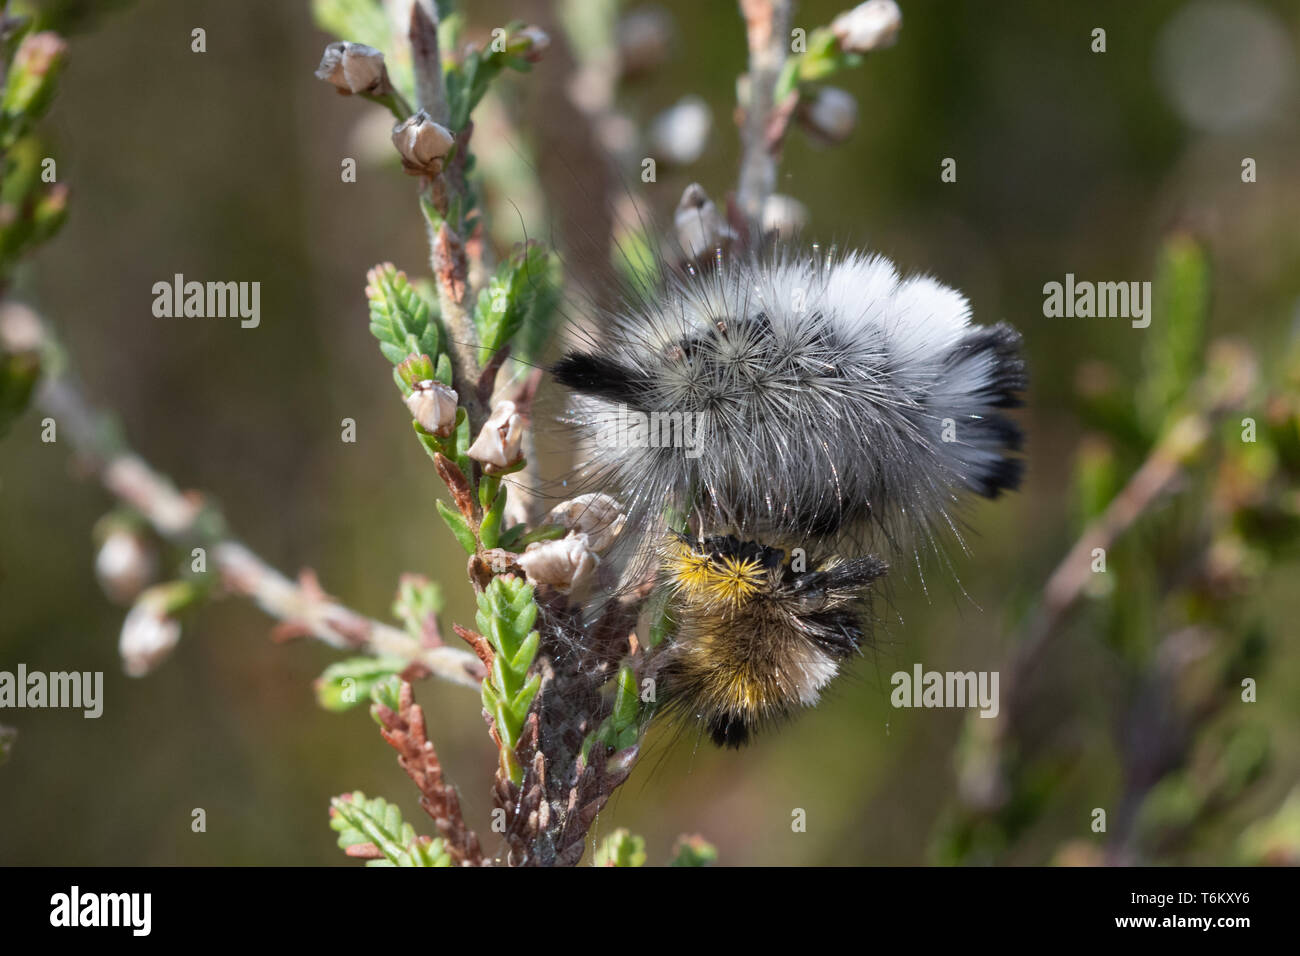 Pale tussock moth (Calliteara pudibunda) larva or caterpillar just after moulting (molting) next to its old molt, moult, skin, on heather plant, UK Stock Photo